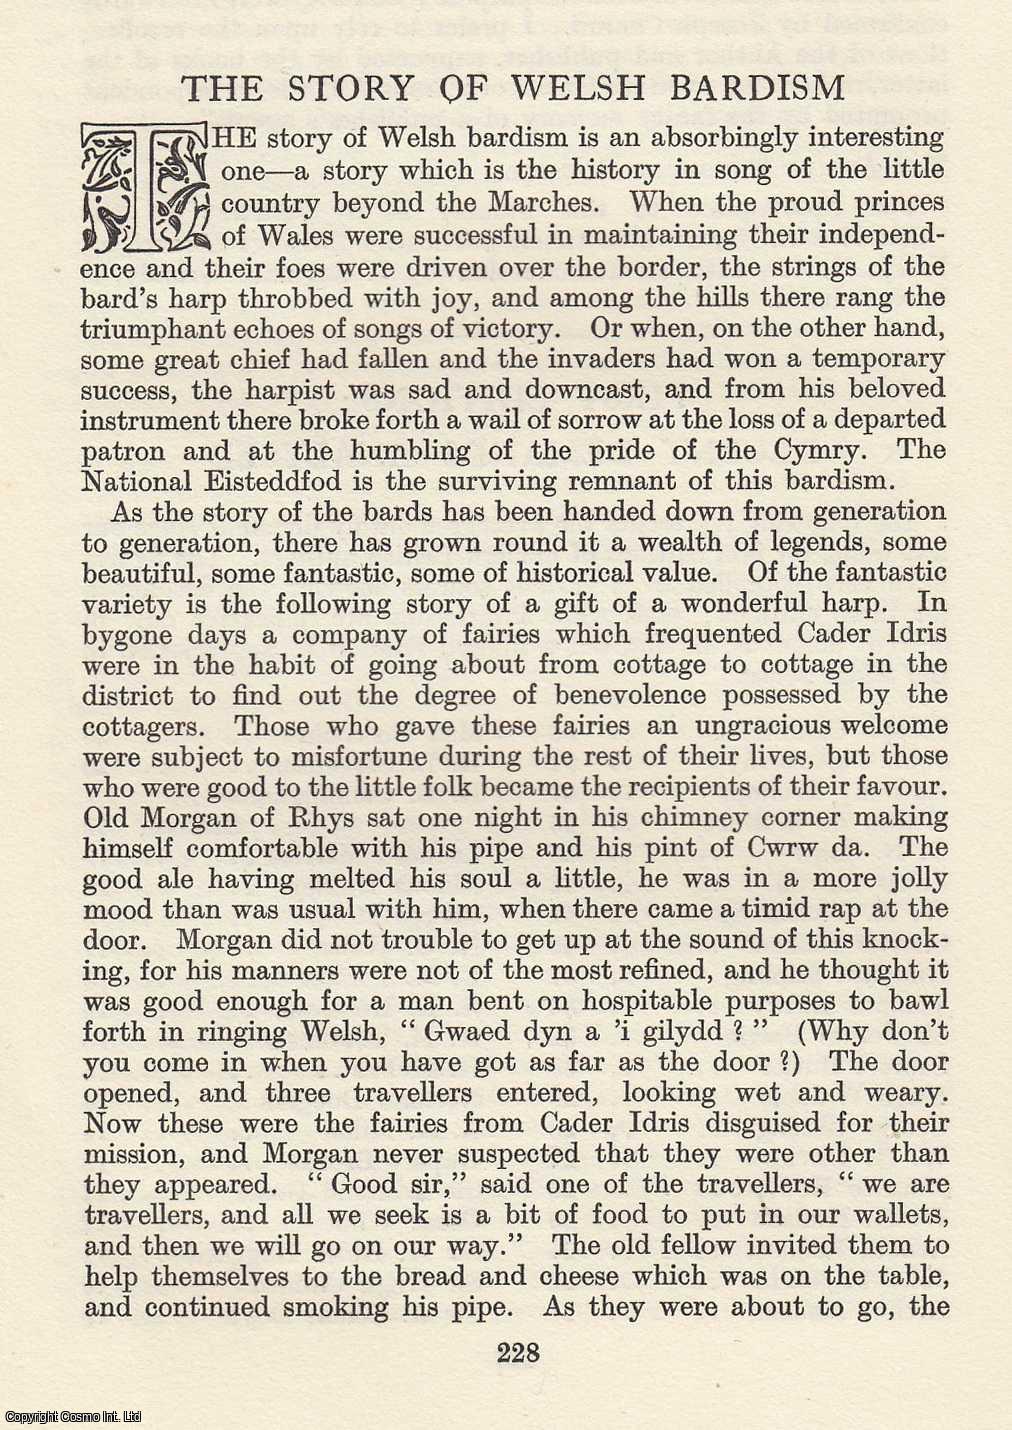 D.H. - The Story of Welsh Bardism. An original article from The Bookman's Journal.